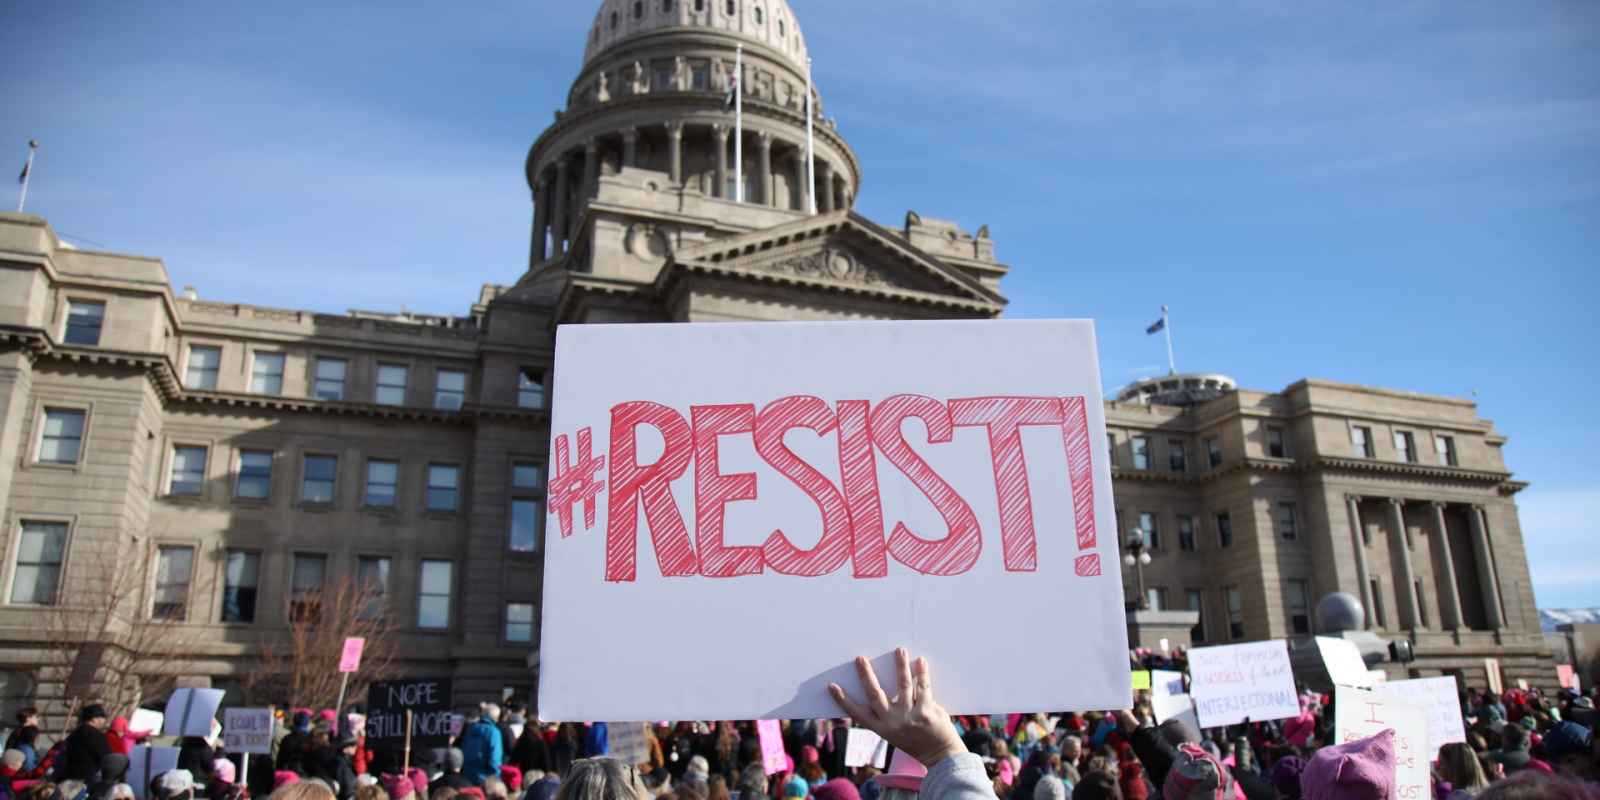 In the center of the image, a person is holding a white sign with "#Resists" in red letters there is a crowd of people in front  of the Idaho state capitol building in the background